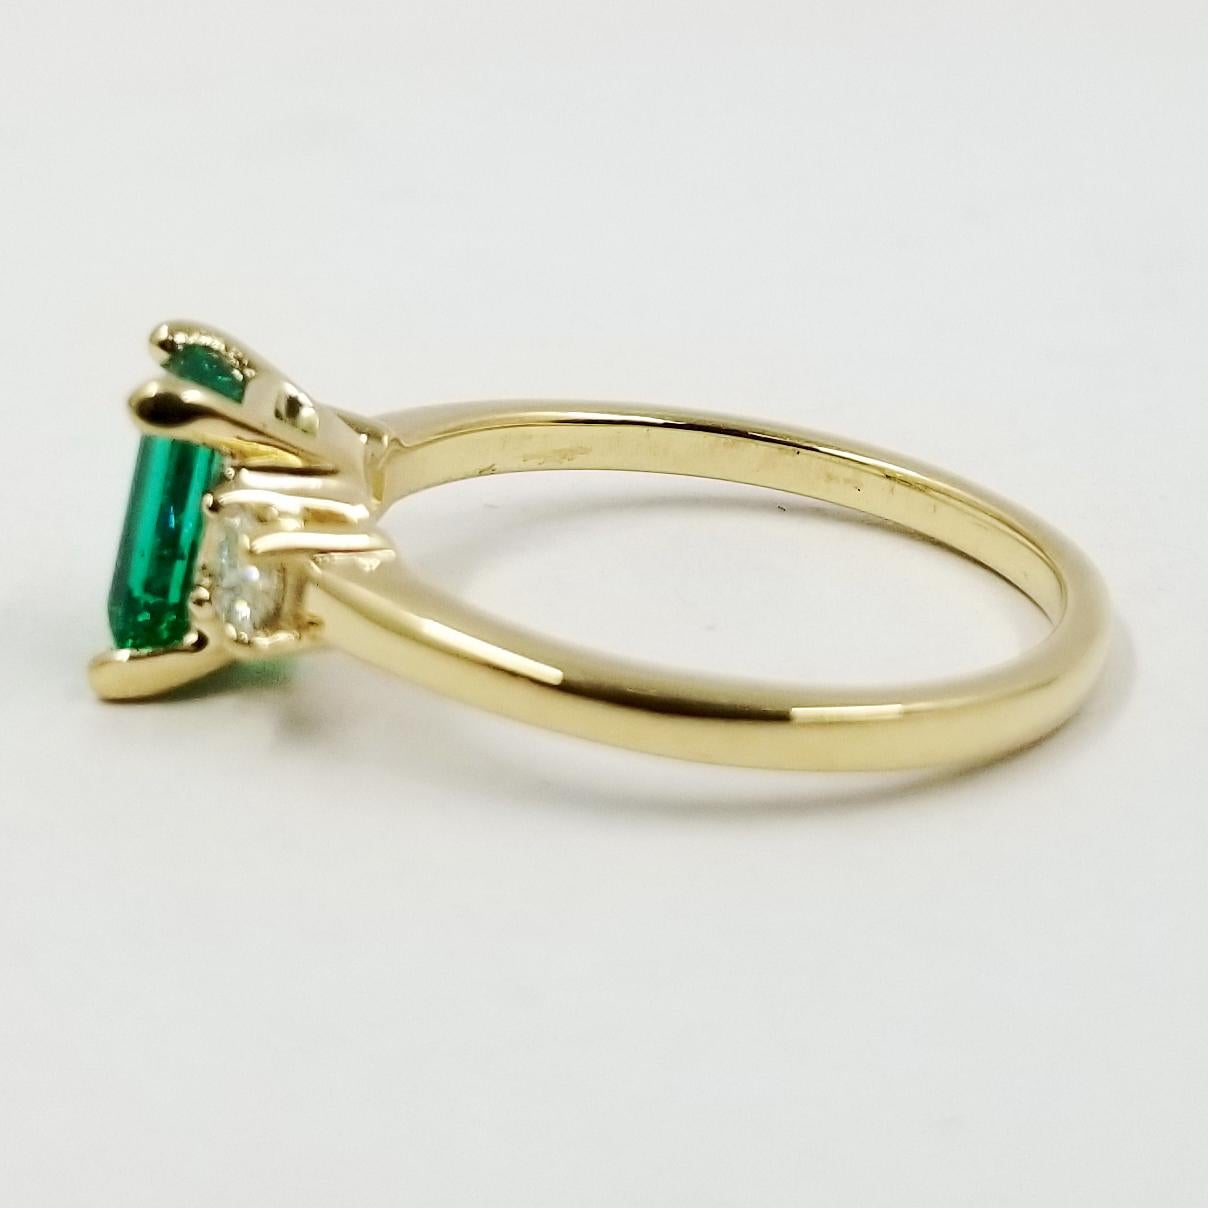 New 14 karat yellow gold ring featuring one 0.85 carat Emerald cut emerald and 2 Princess cut diamonds totaling 0.20 carat of VS clarity & G color. Current finger size is 7.5; purchase includes one free sizing.